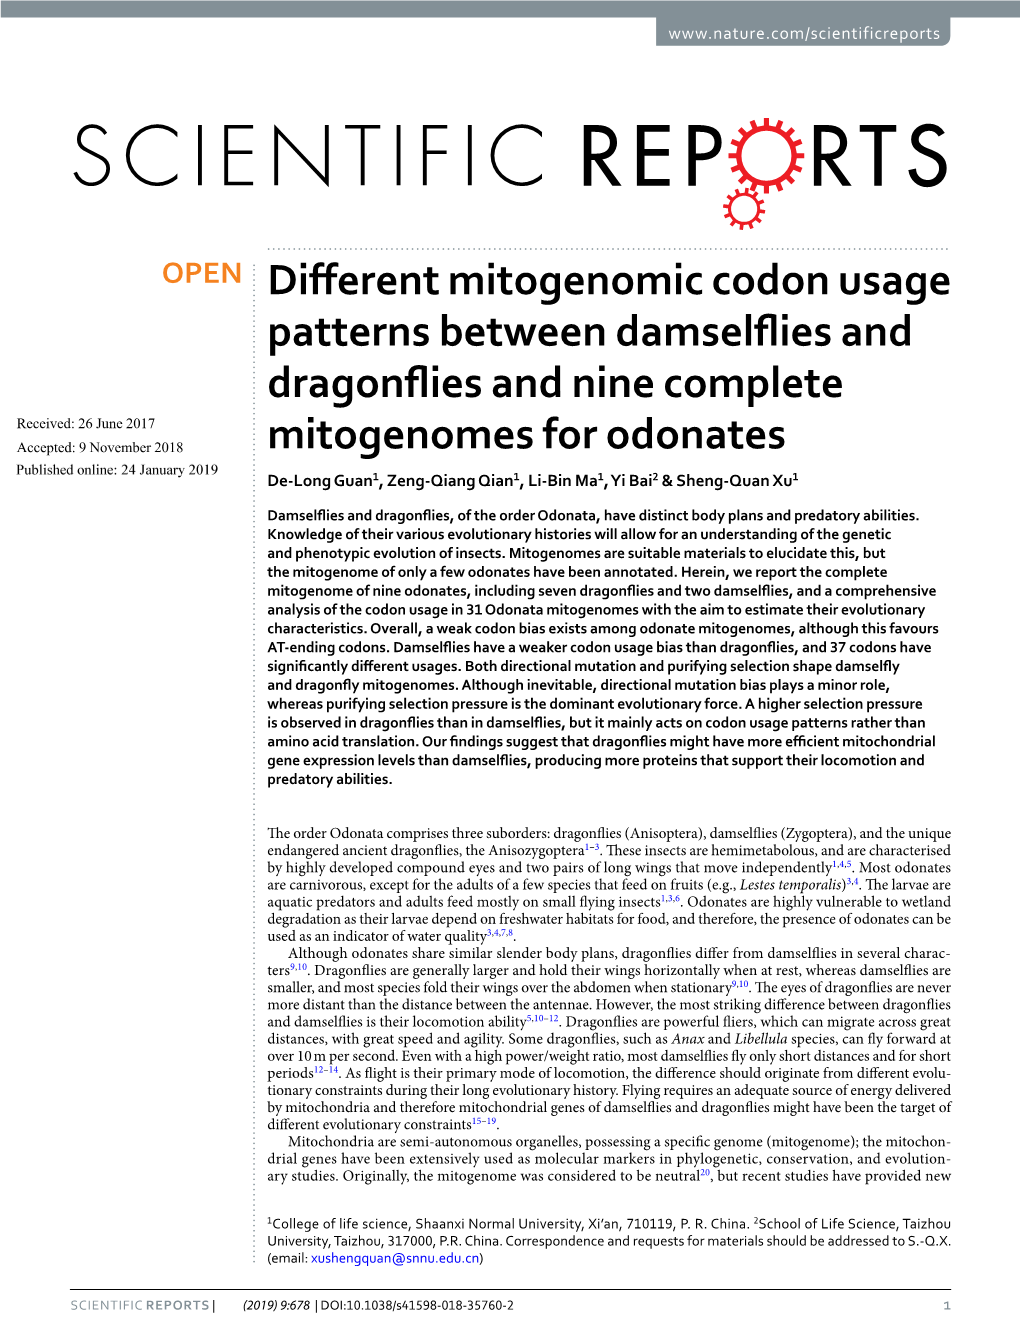 Different Mitogenomic Codon Usage Patterns Between Damselflies And